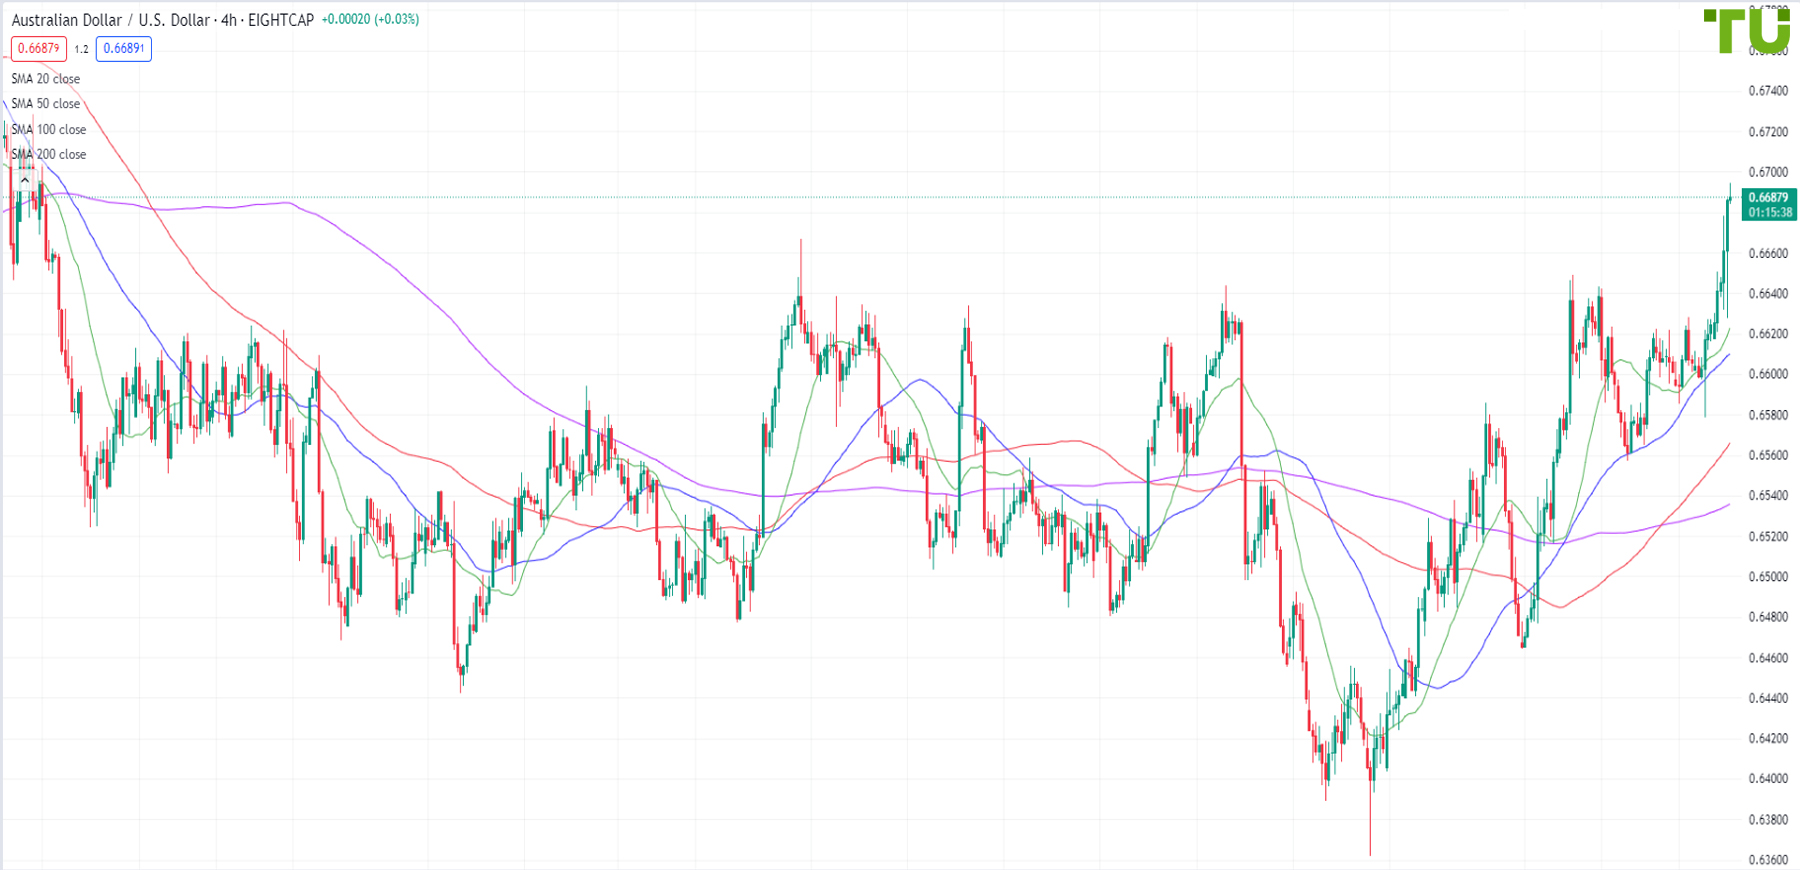 AUD/USD may continue to rise